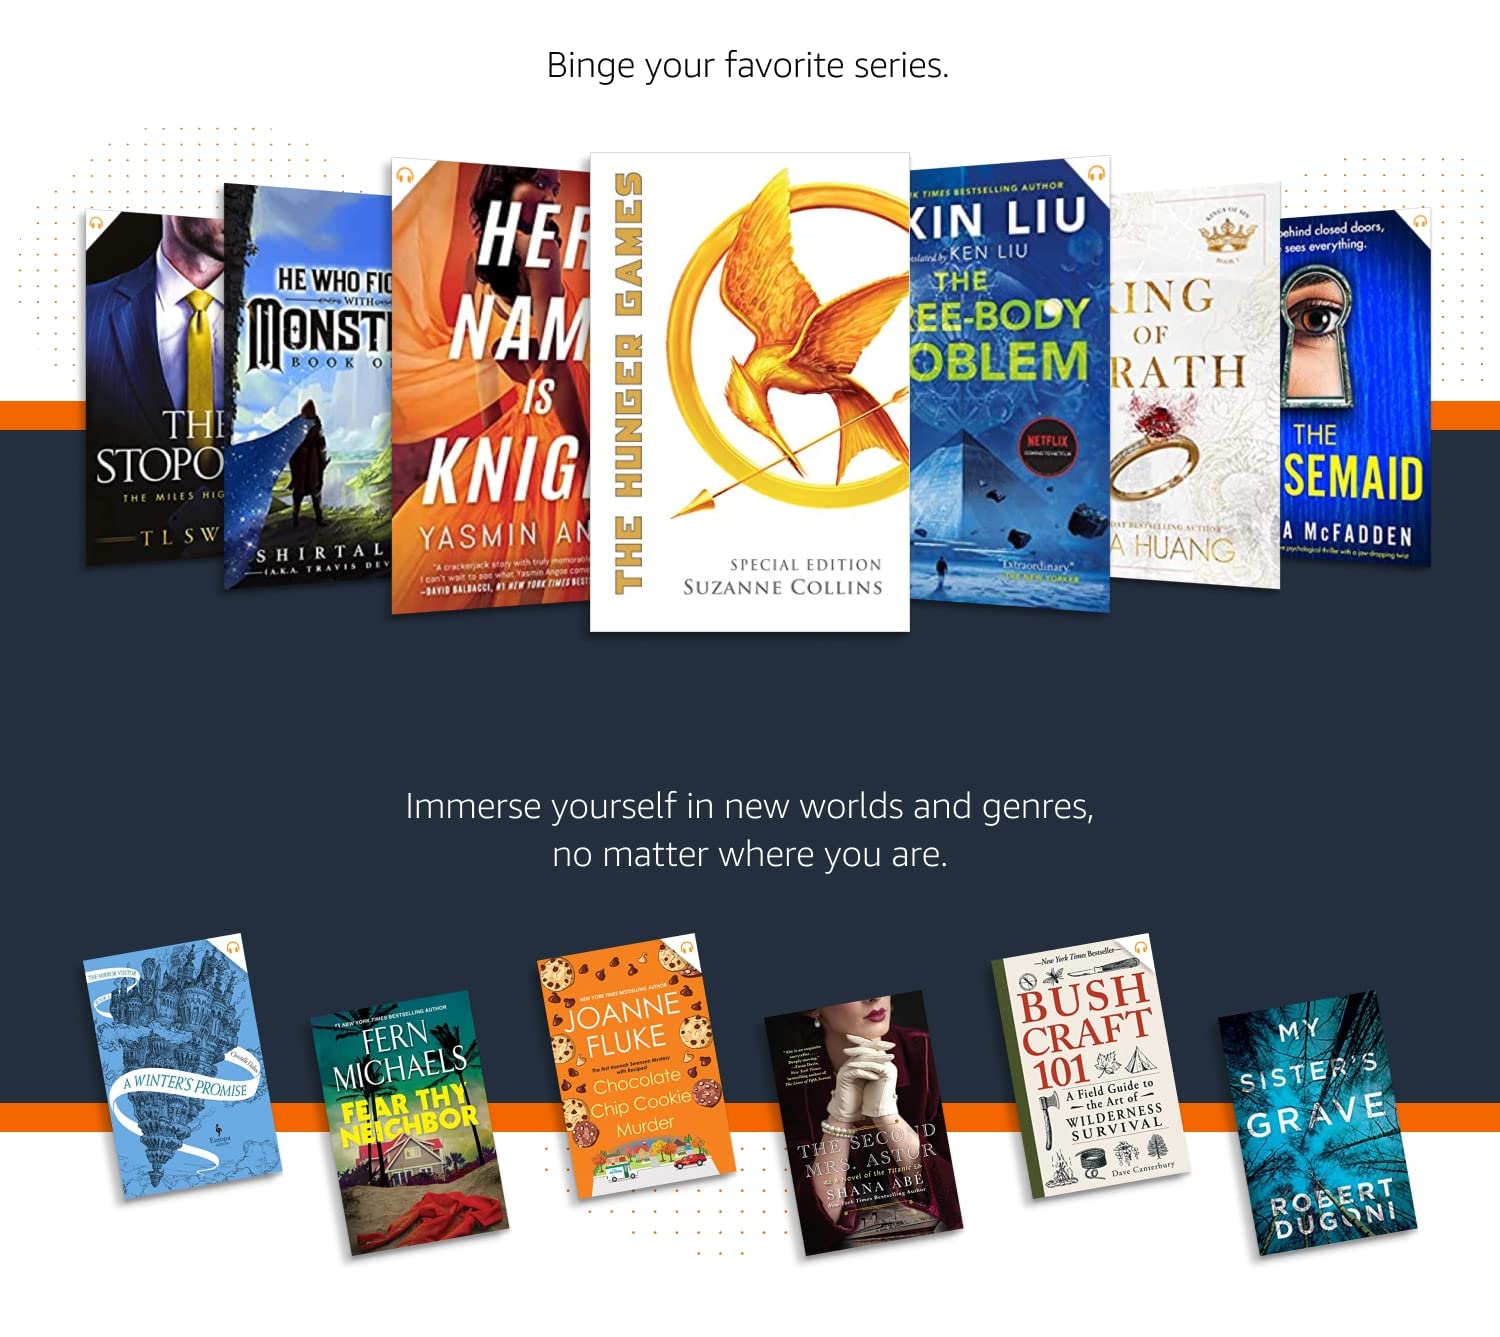 Kindle Unlimited in Australia: Is it worth $13.99 per month?